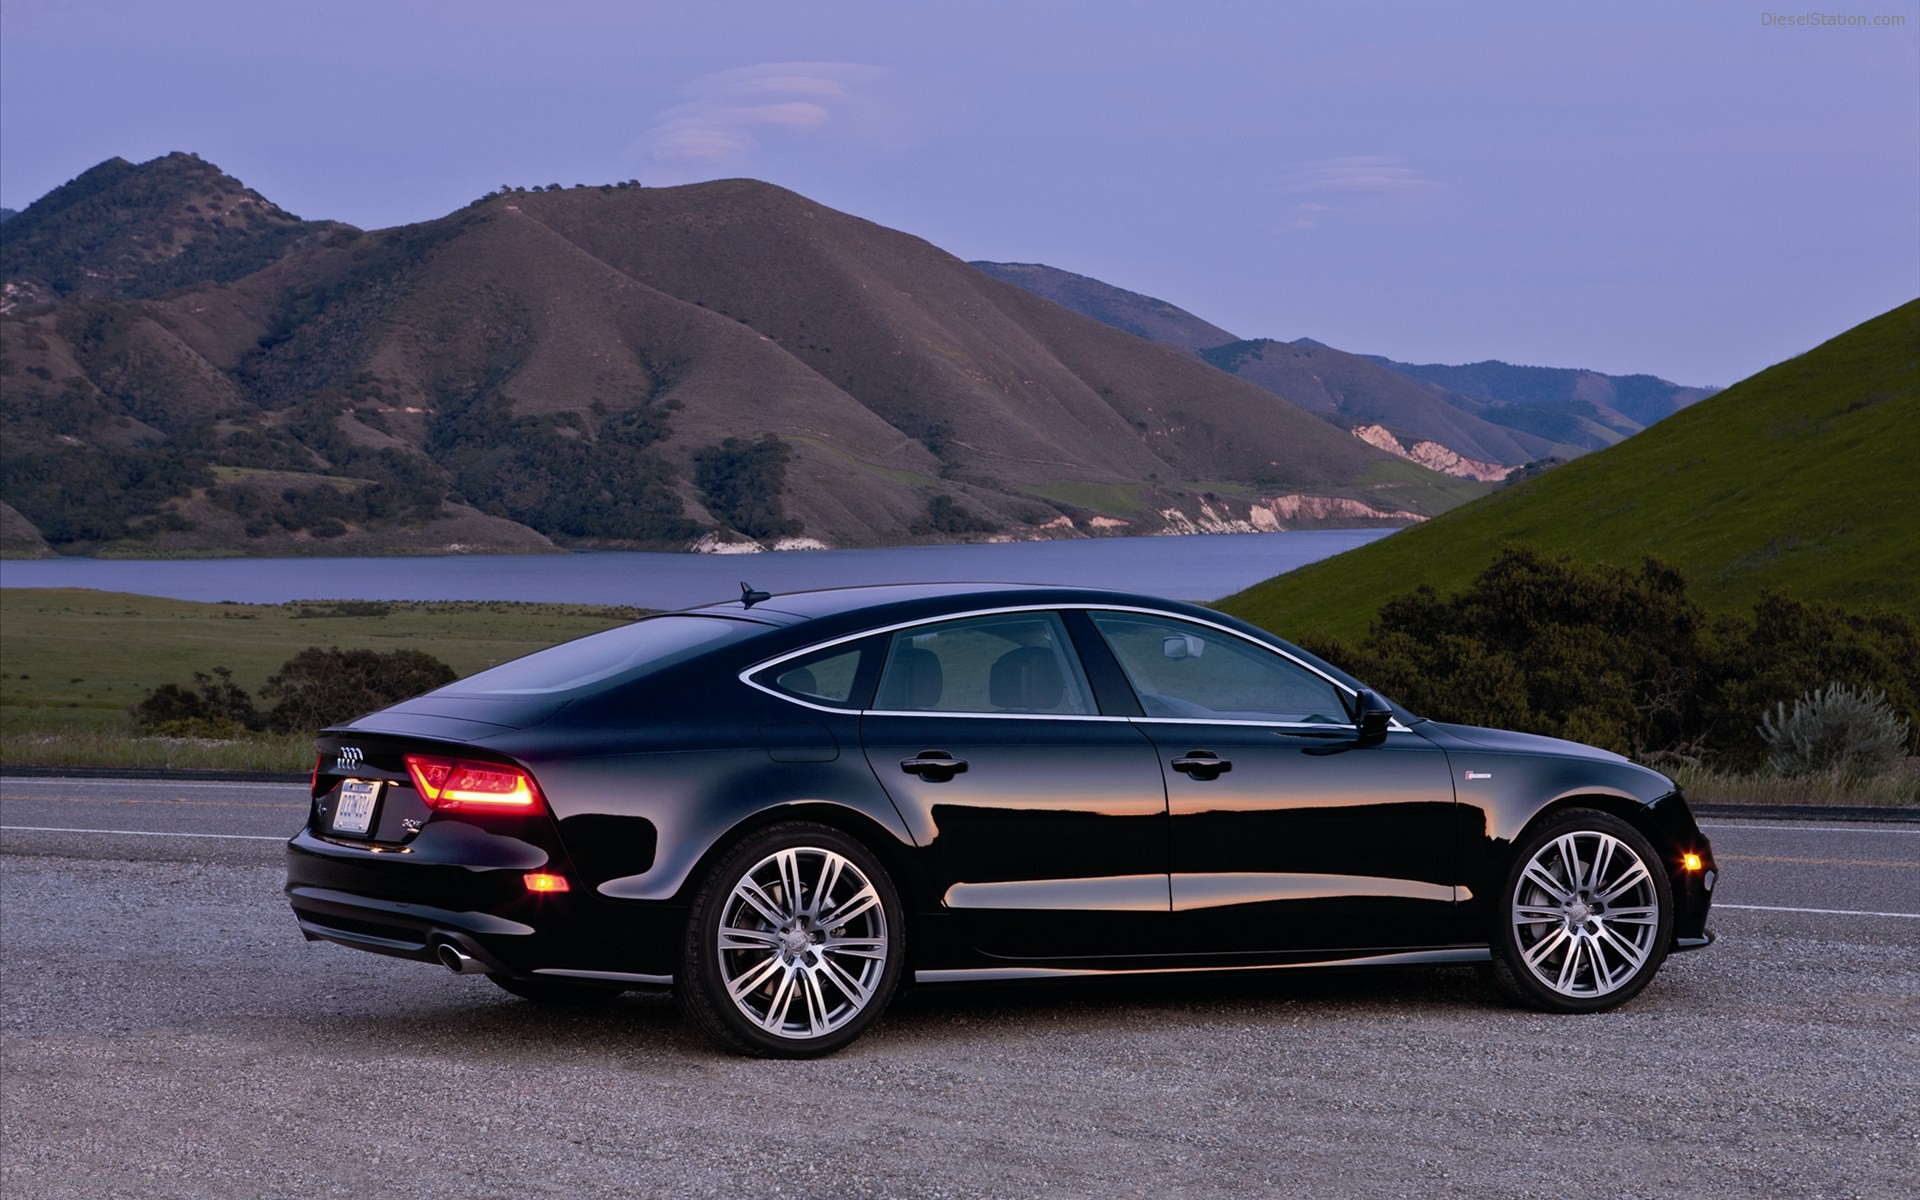 Audi A7 Widescreen Exotic Car Image Of